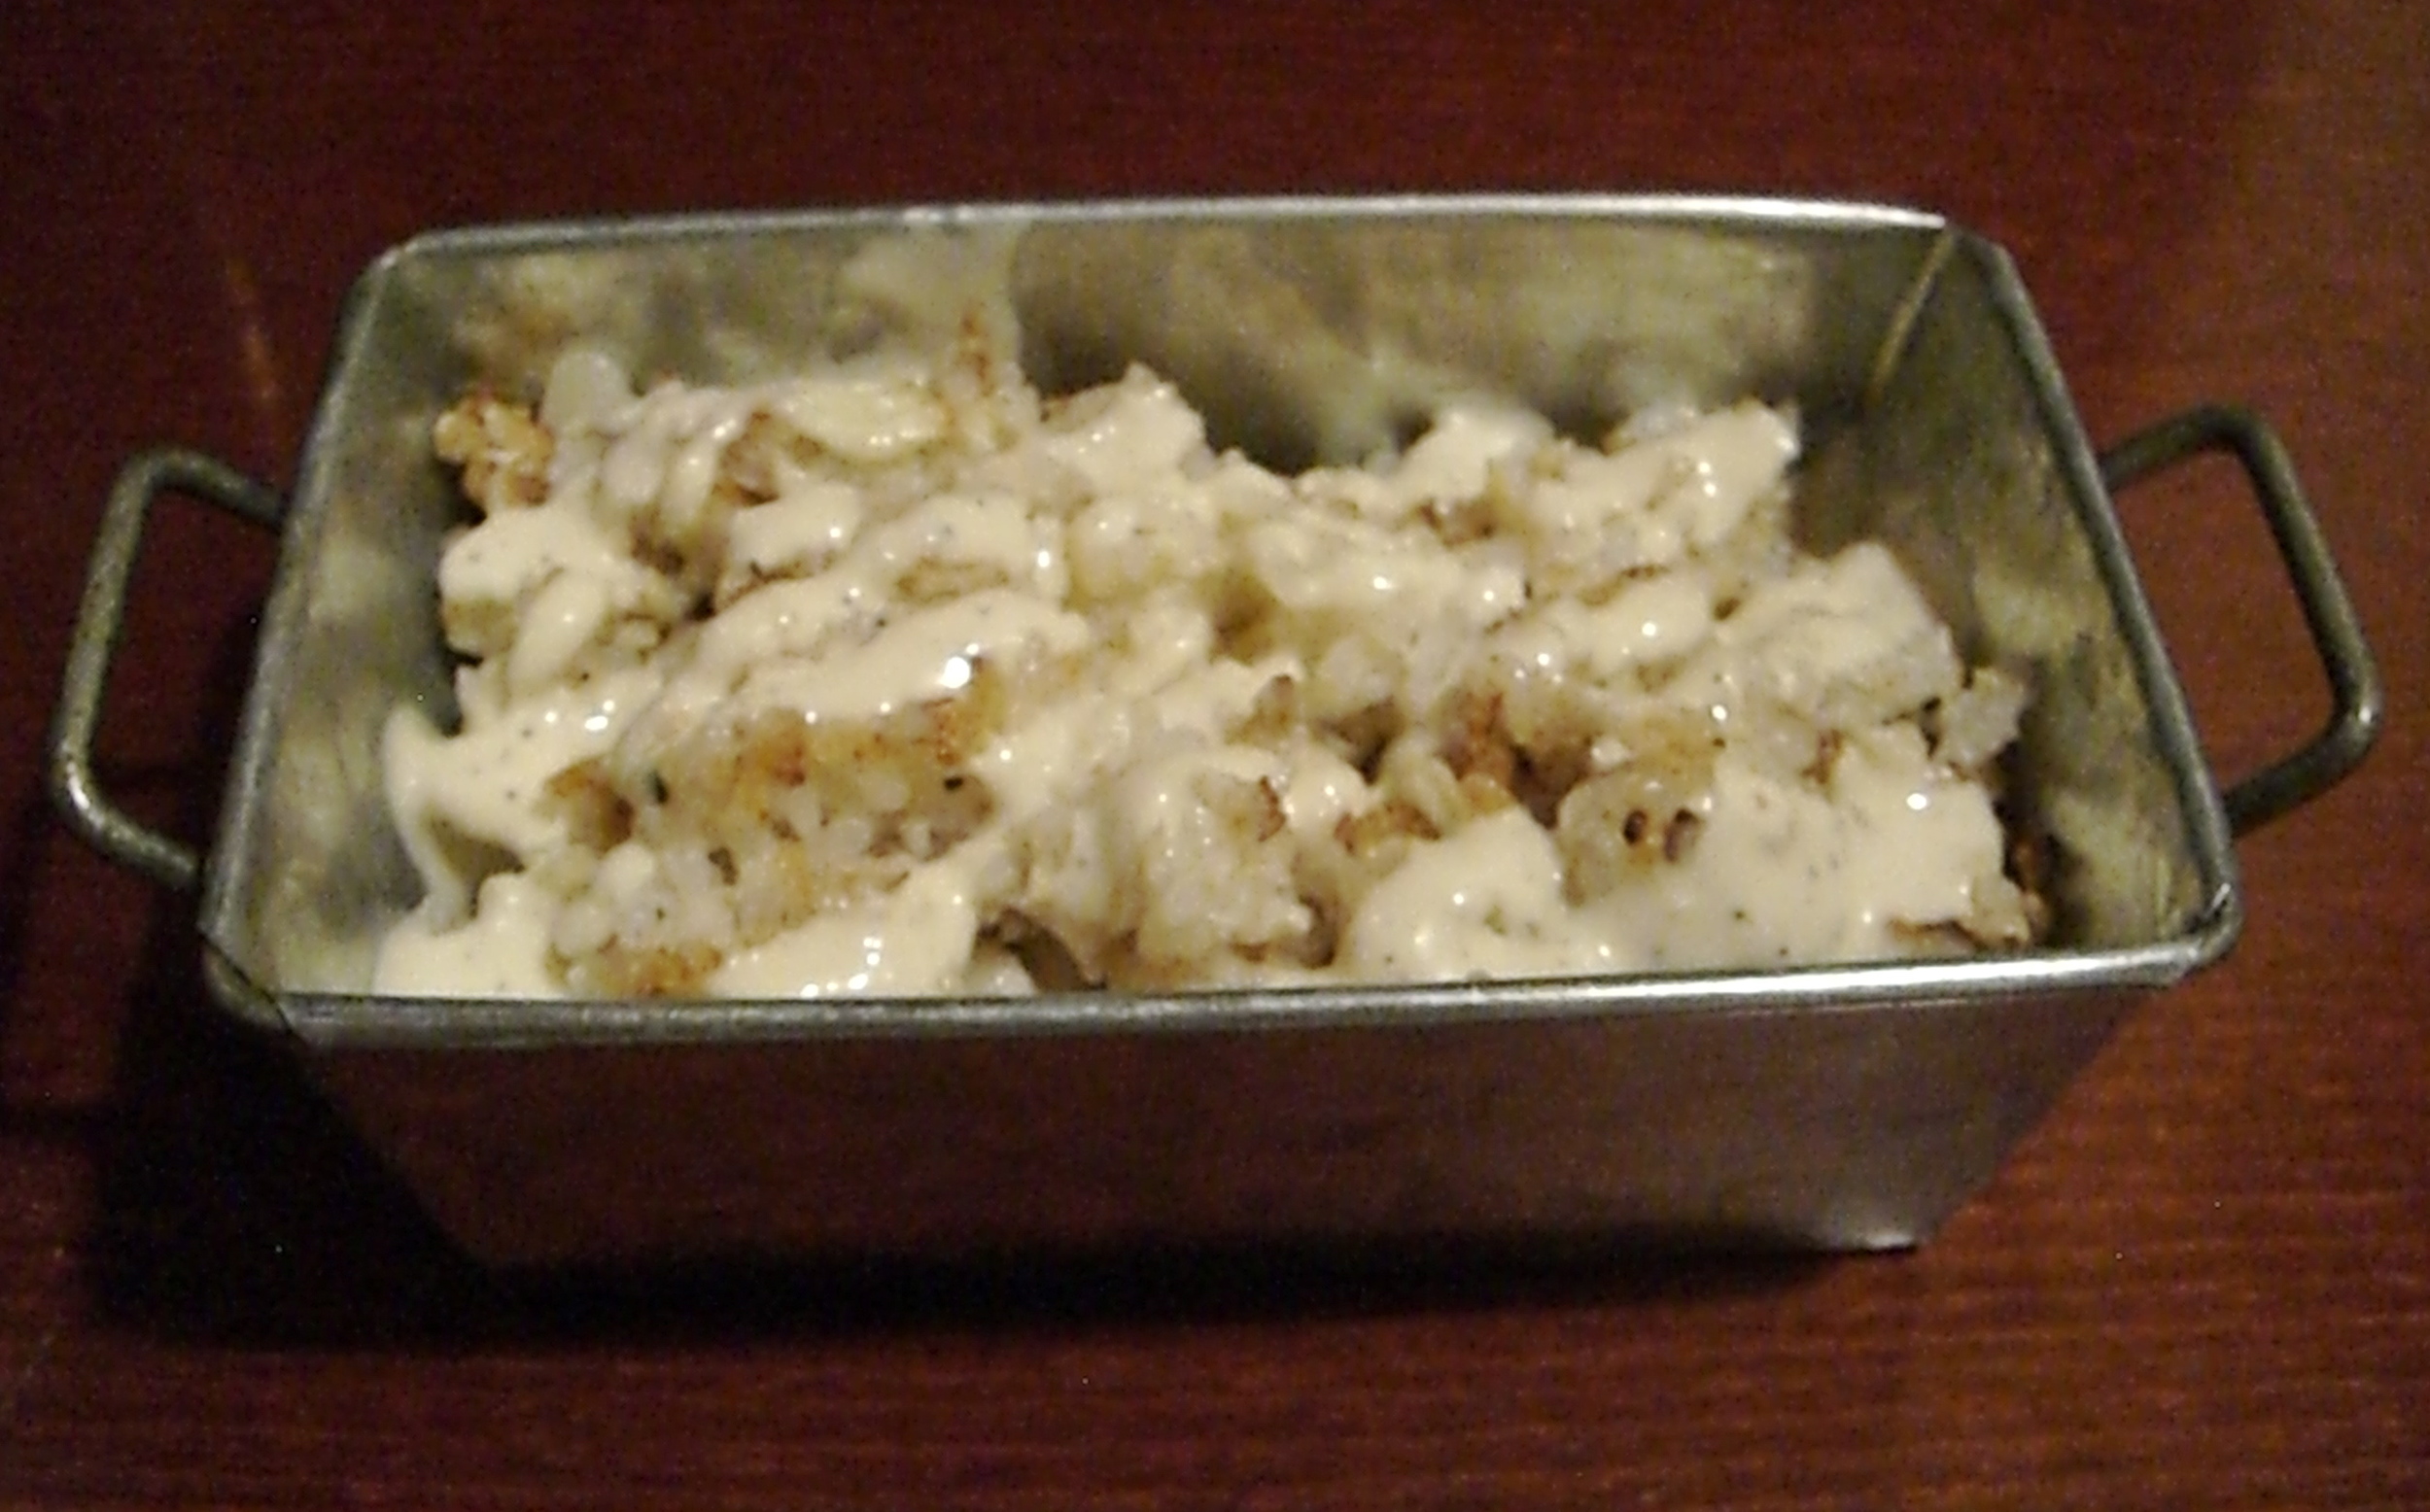 This vegan cauliflower "rice" with truffle sauce was so delicious it could accompany any meal vegan or otherwise.